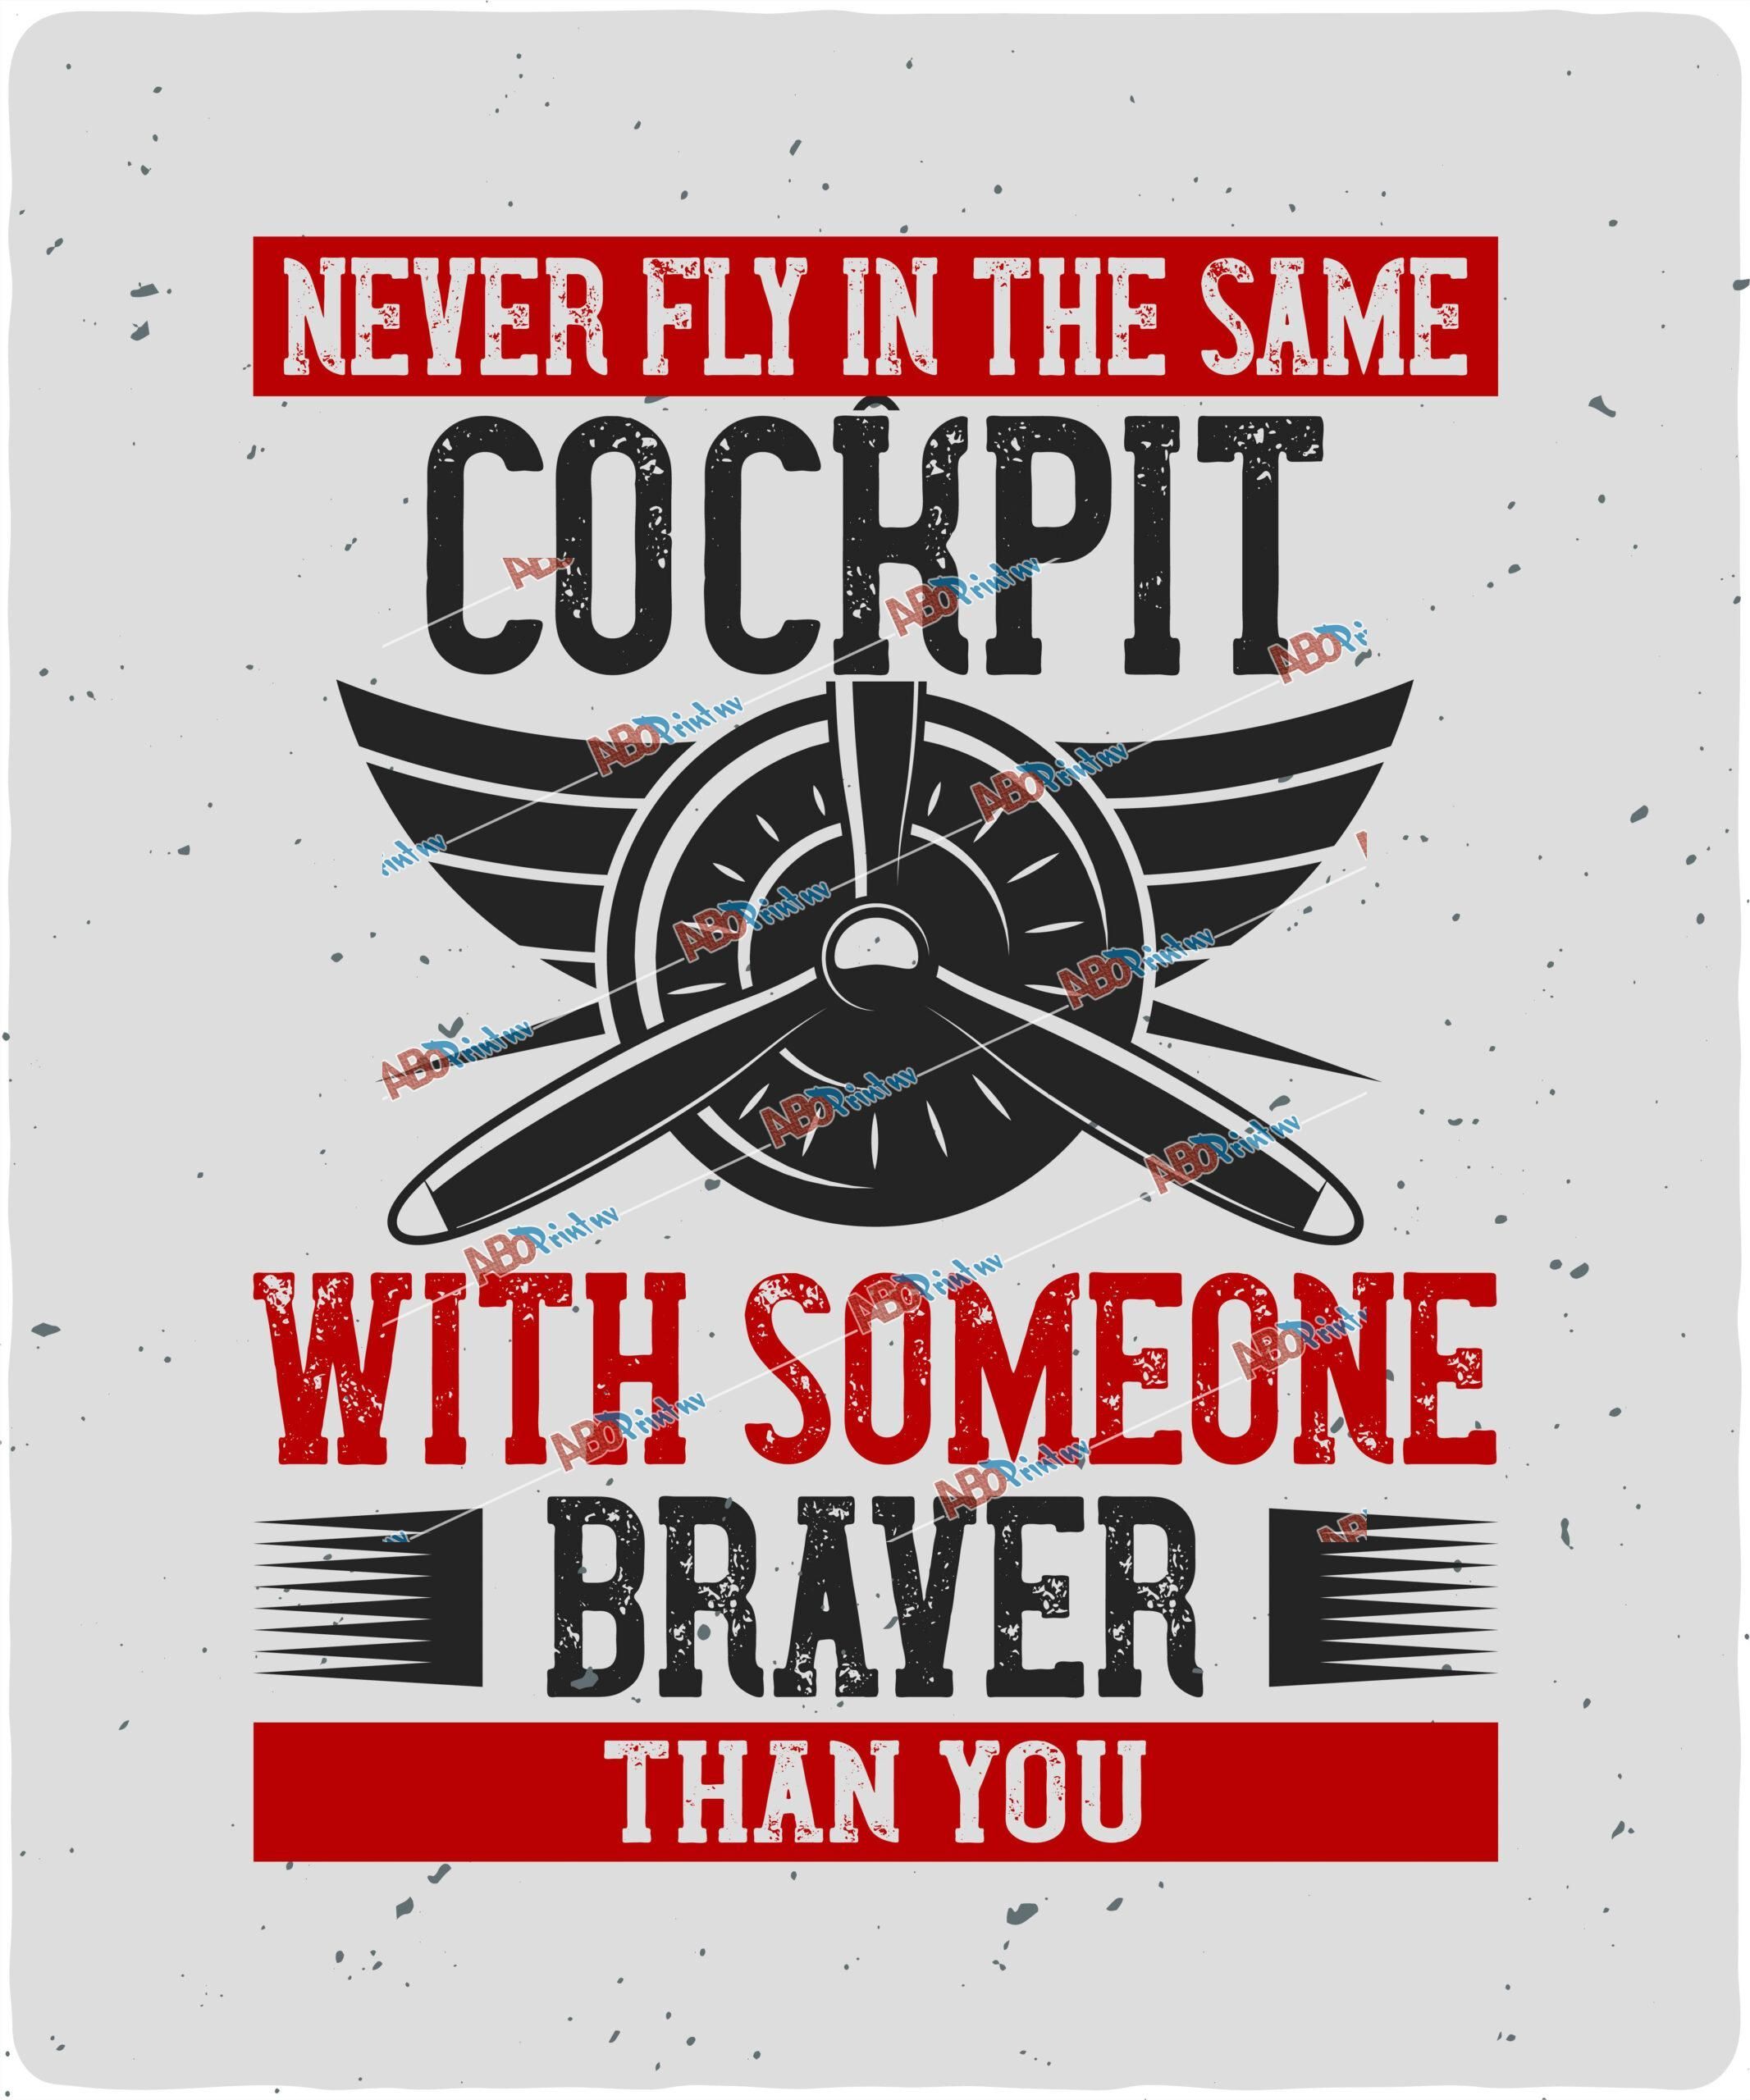 Never fly in the same cockpit with someone braver than you